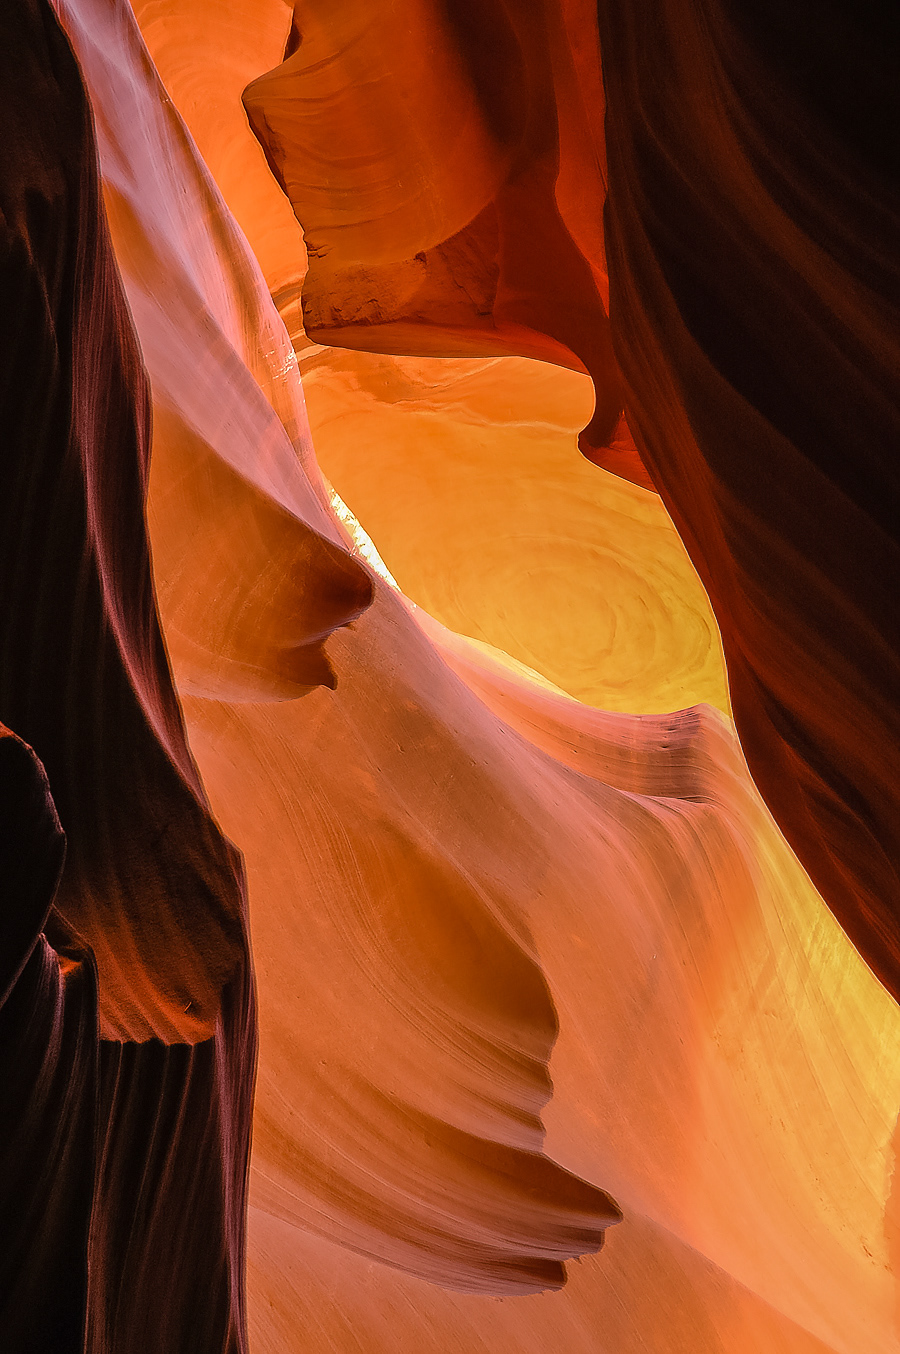 page arizona scenic antelope canyon slot canyon Travel light and color piller of light